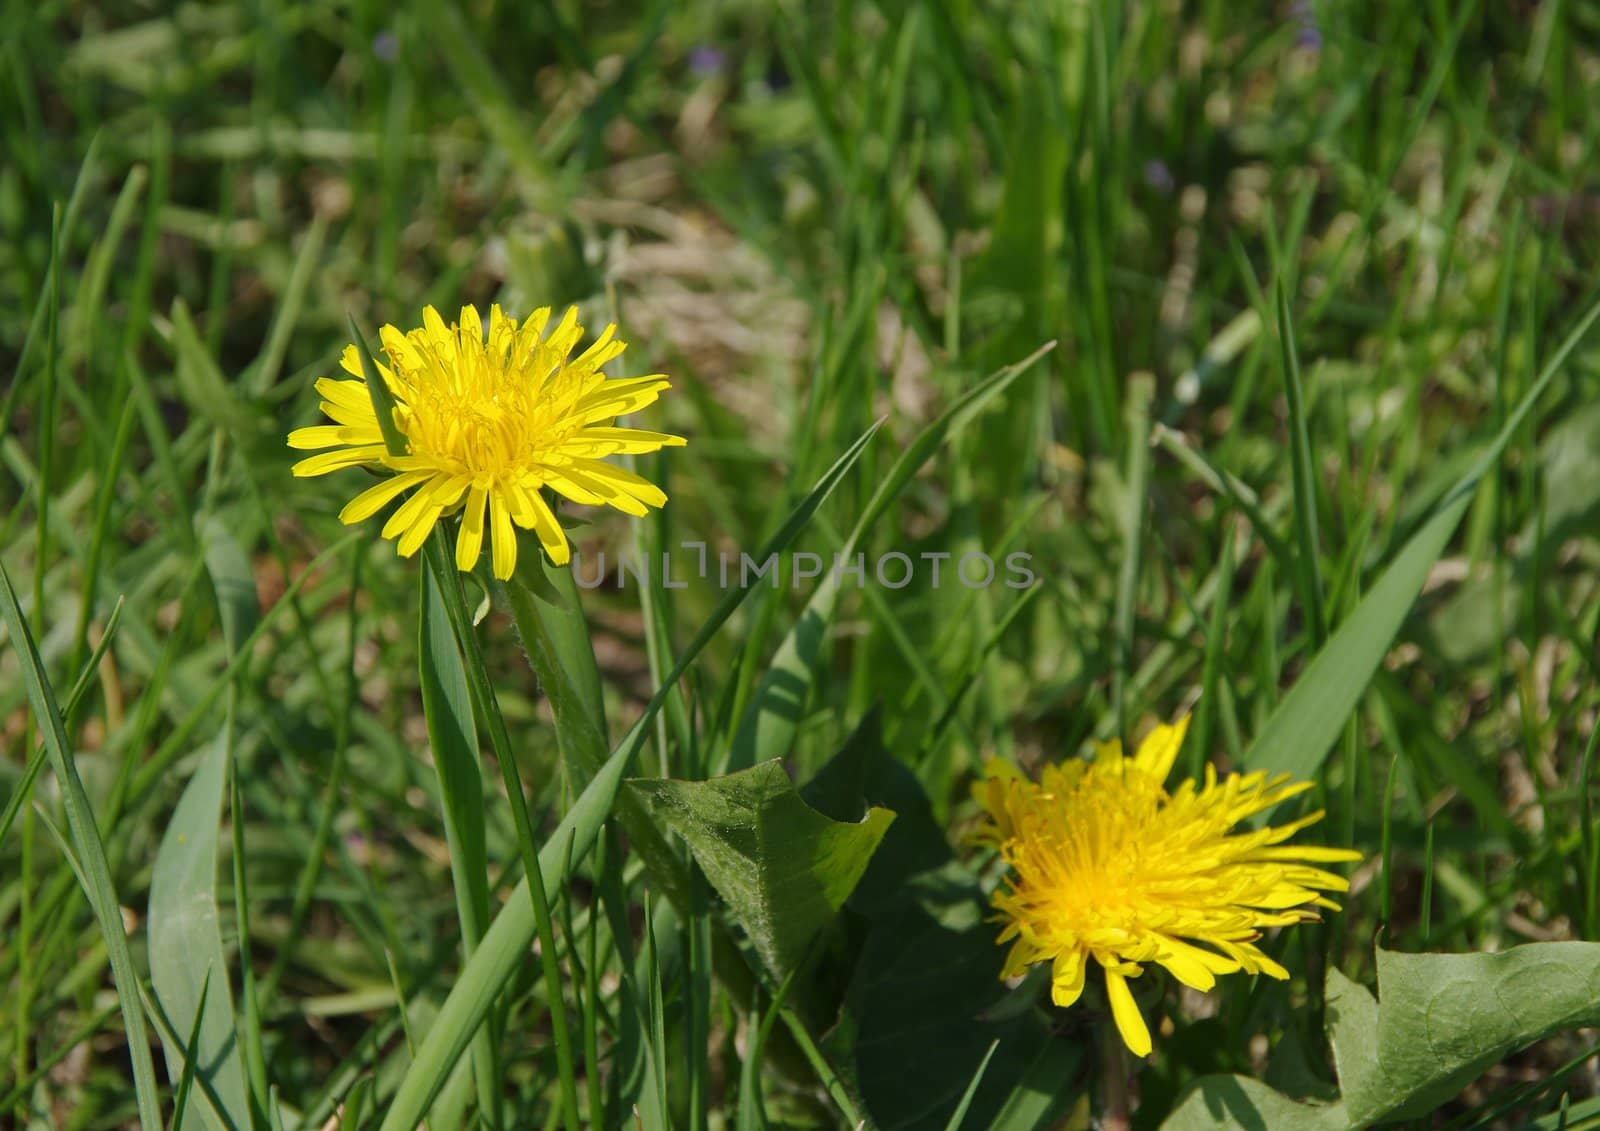 Two dandelion flowers and the grass